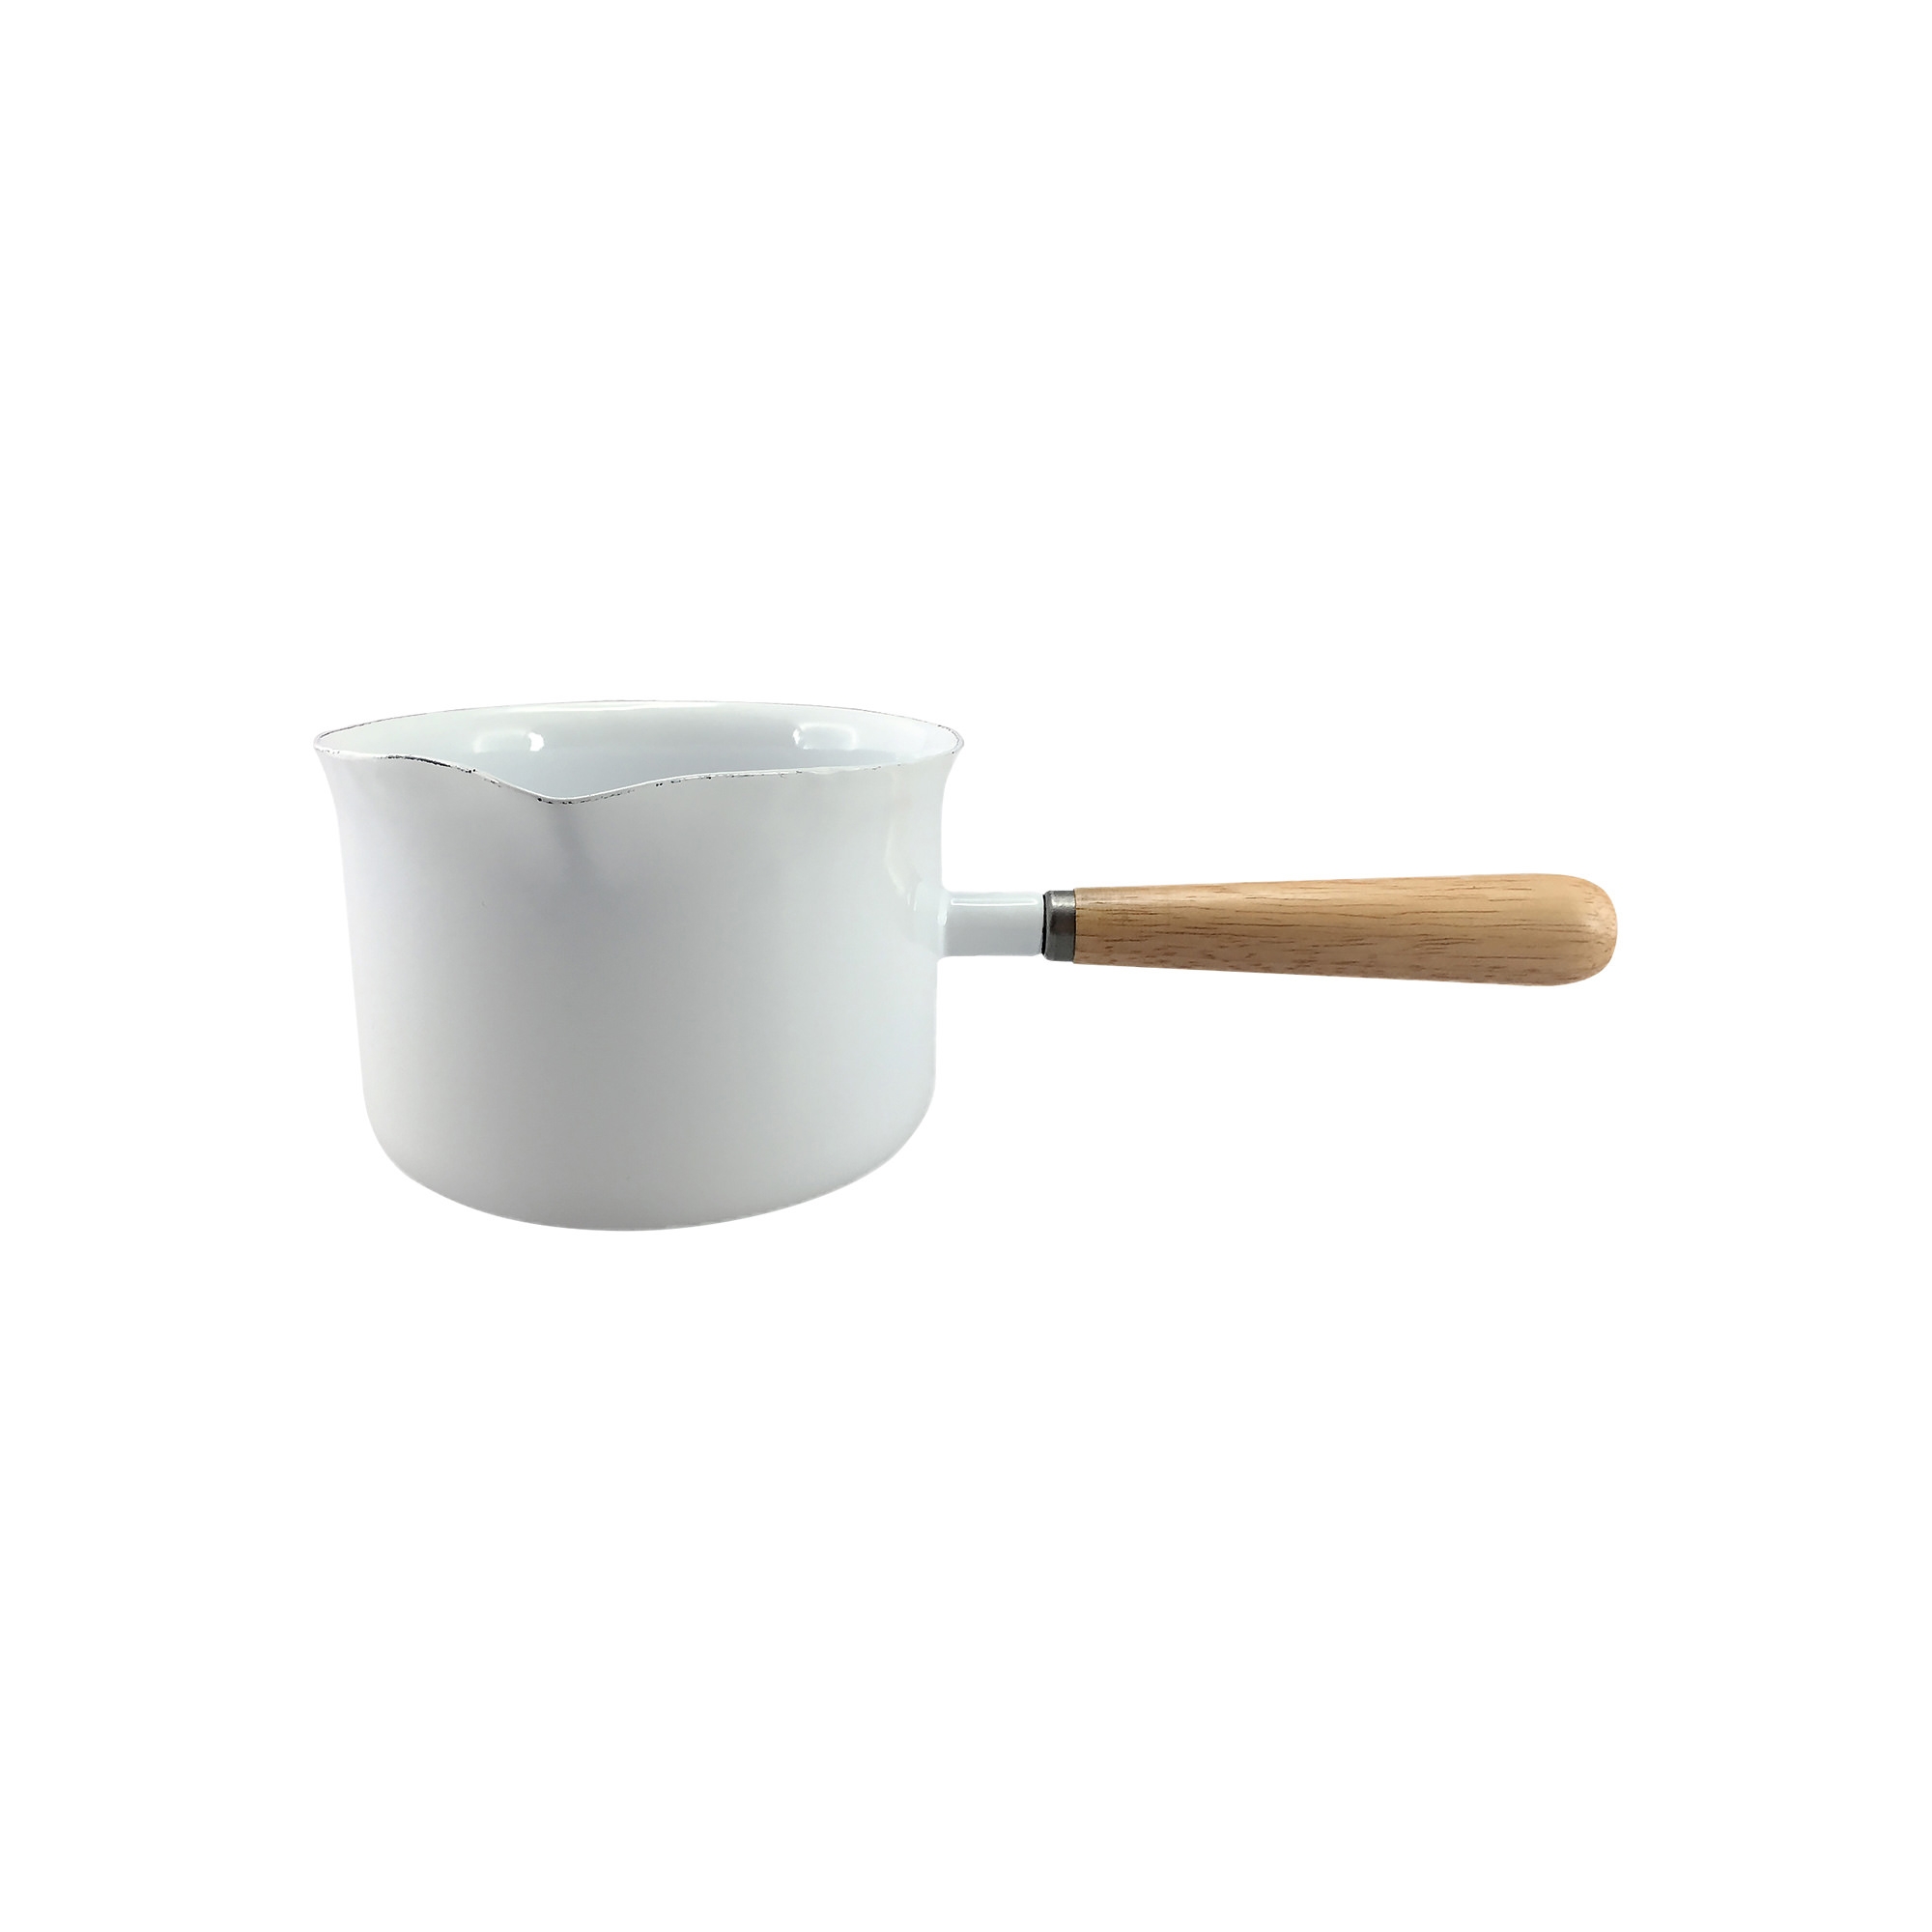 Falcon Enamelware Butter Warmer with Wood Handle 400ml White Image 1